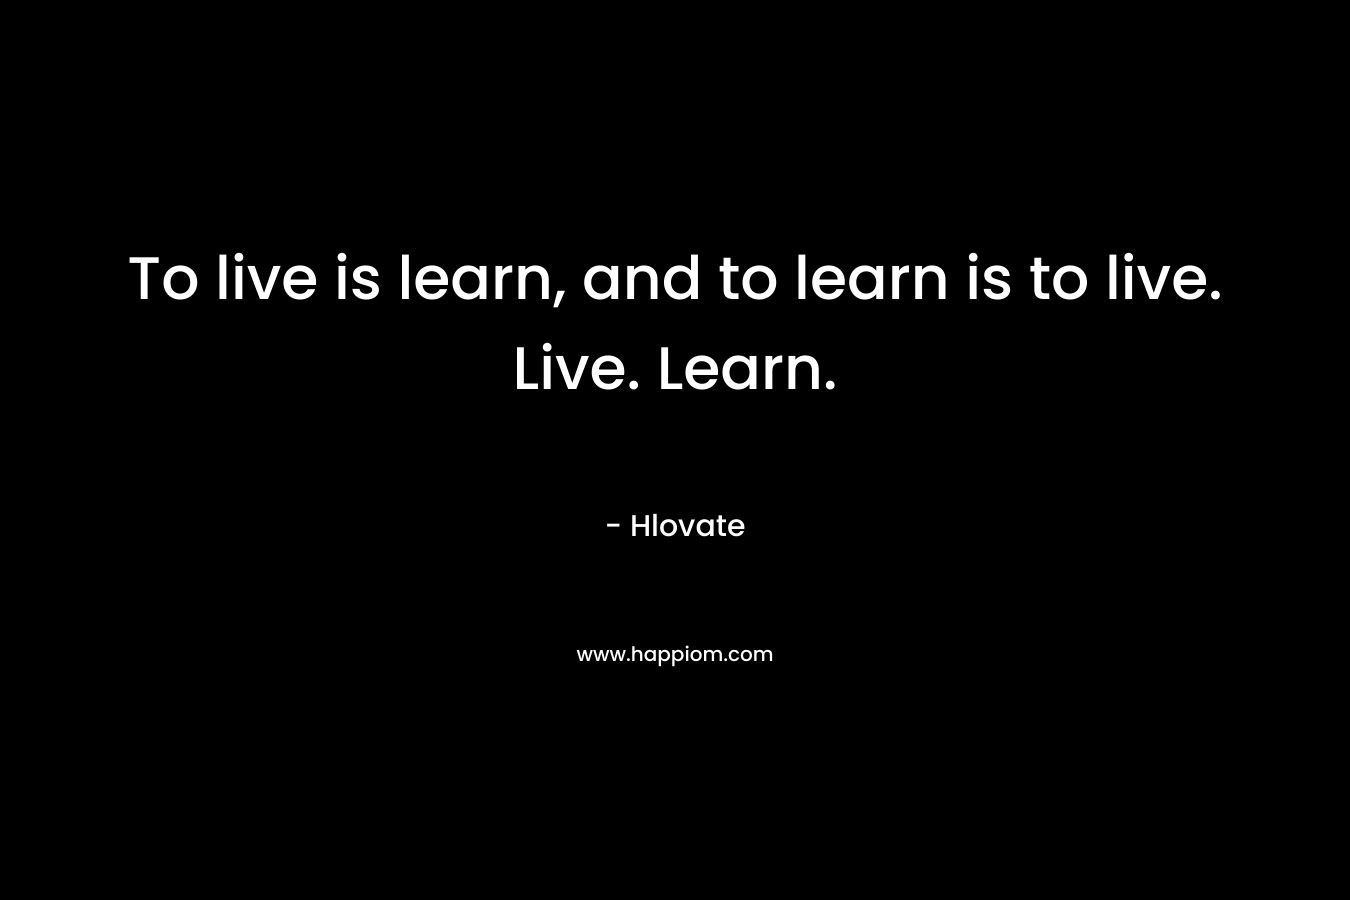 To live is learn, and to learn is to live. Live. Learn. – Hlovate